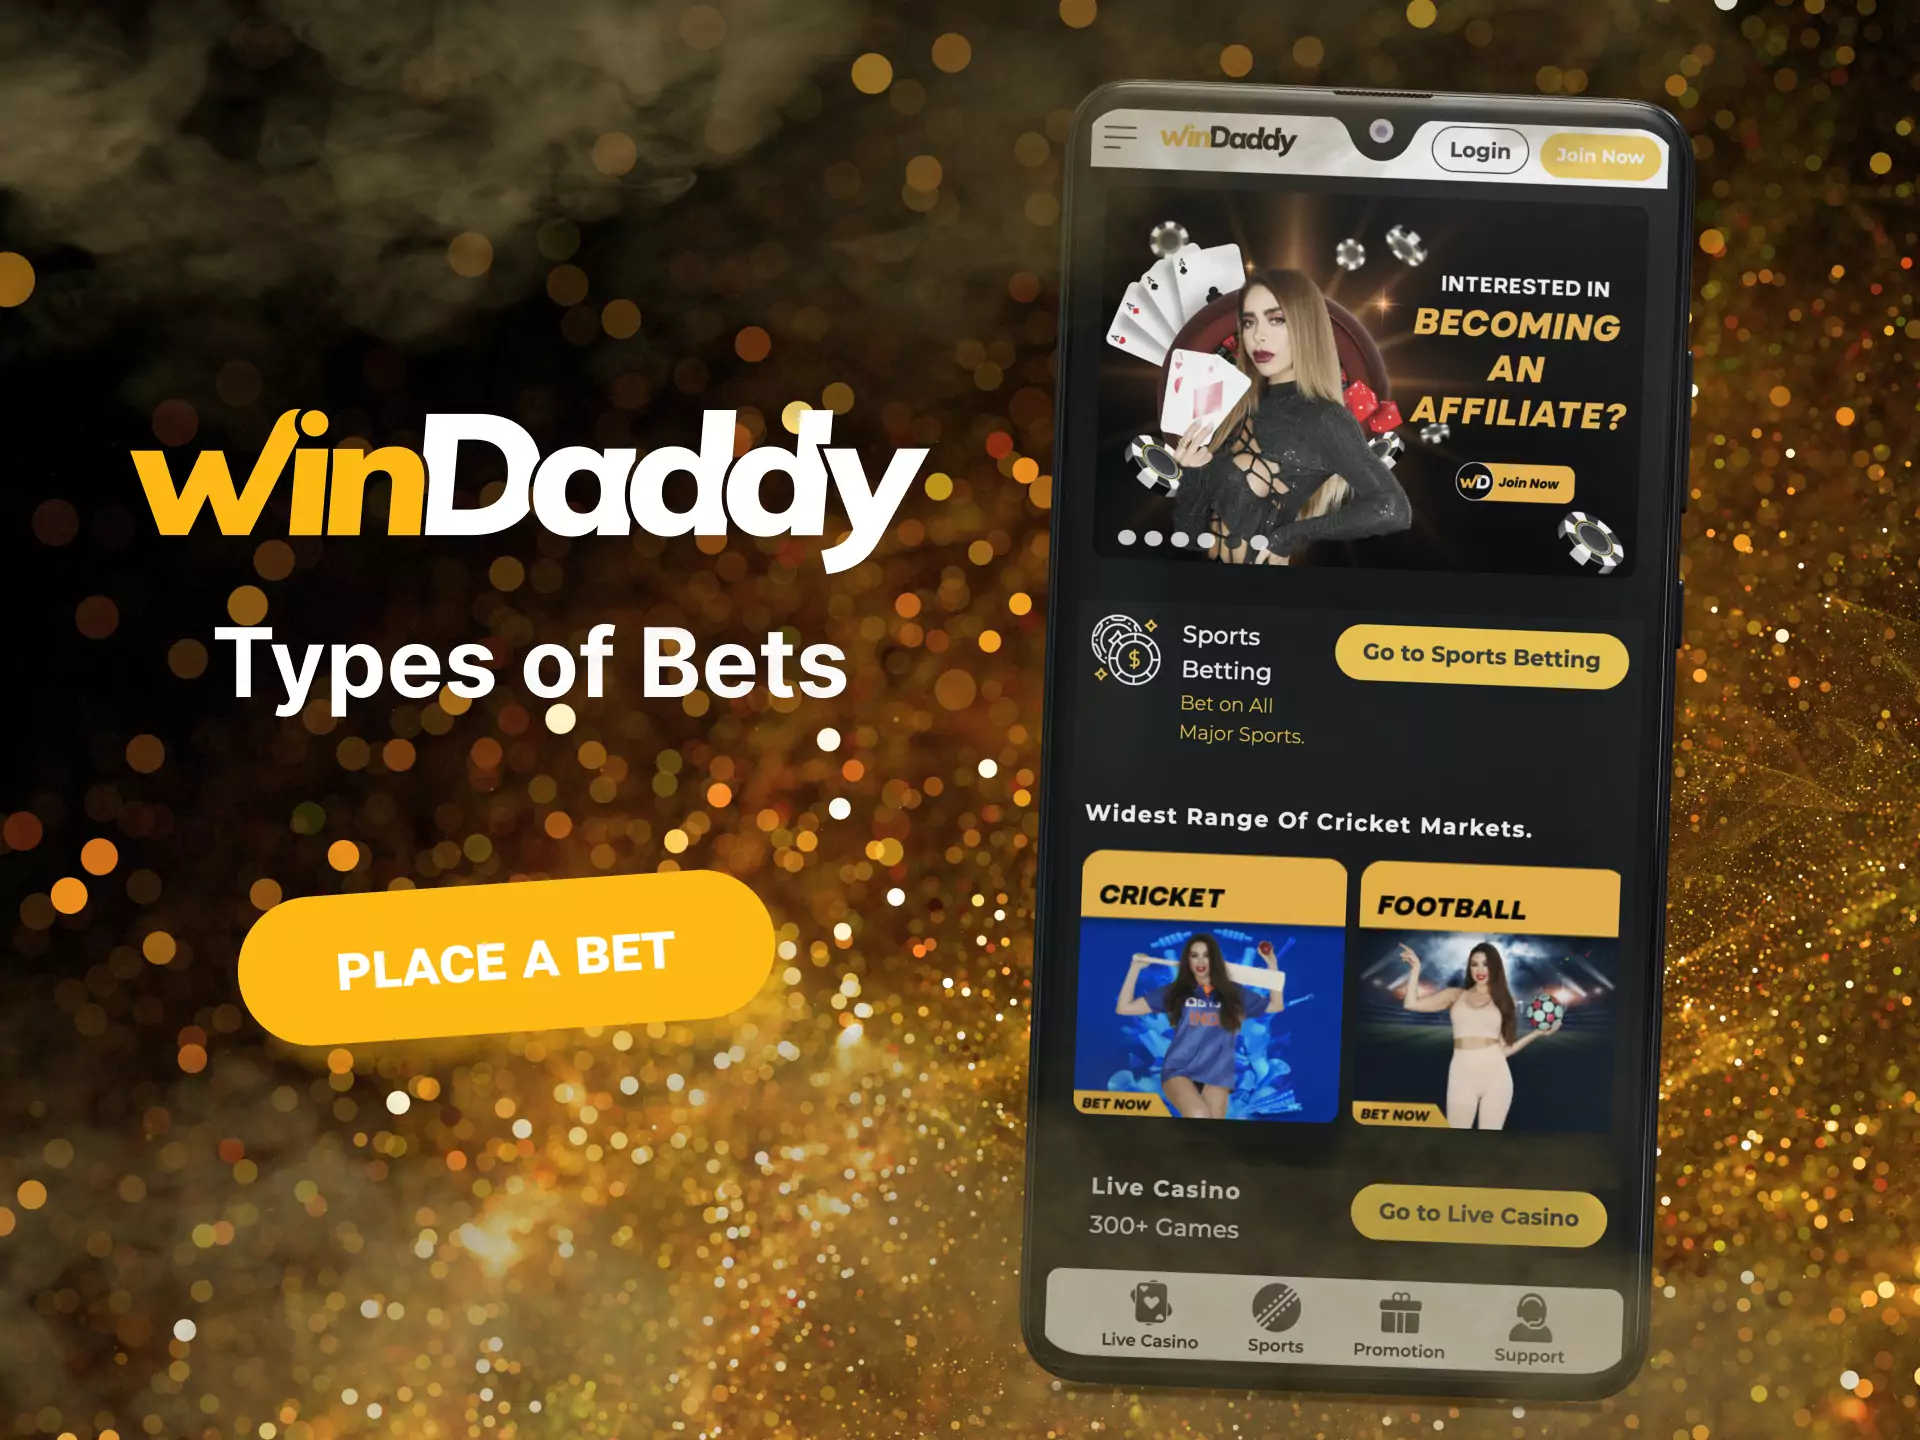 Use Windaddy with three different types of bets.